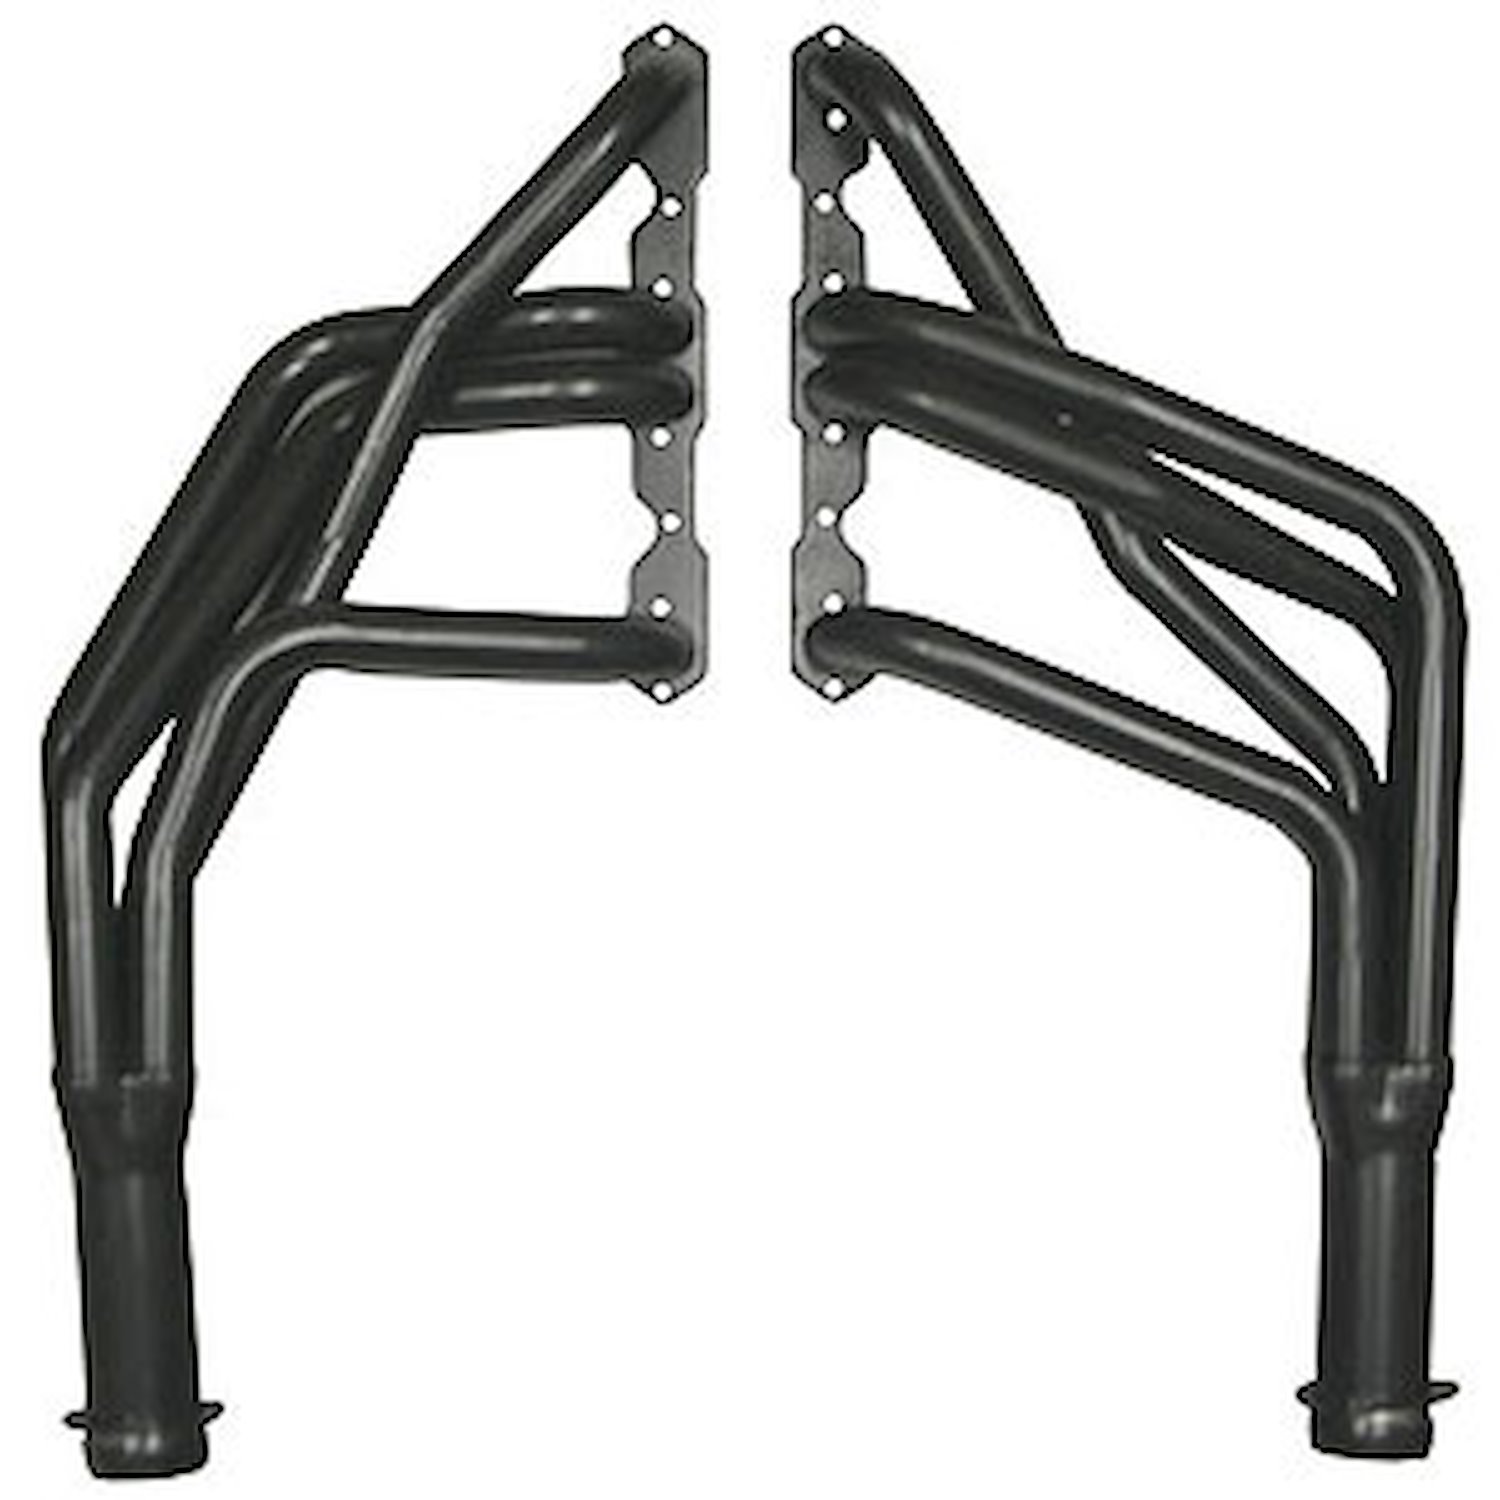 Standard Duty Uncoated Headers for 1967-69 Camaro ("Close Ratio" steering box)